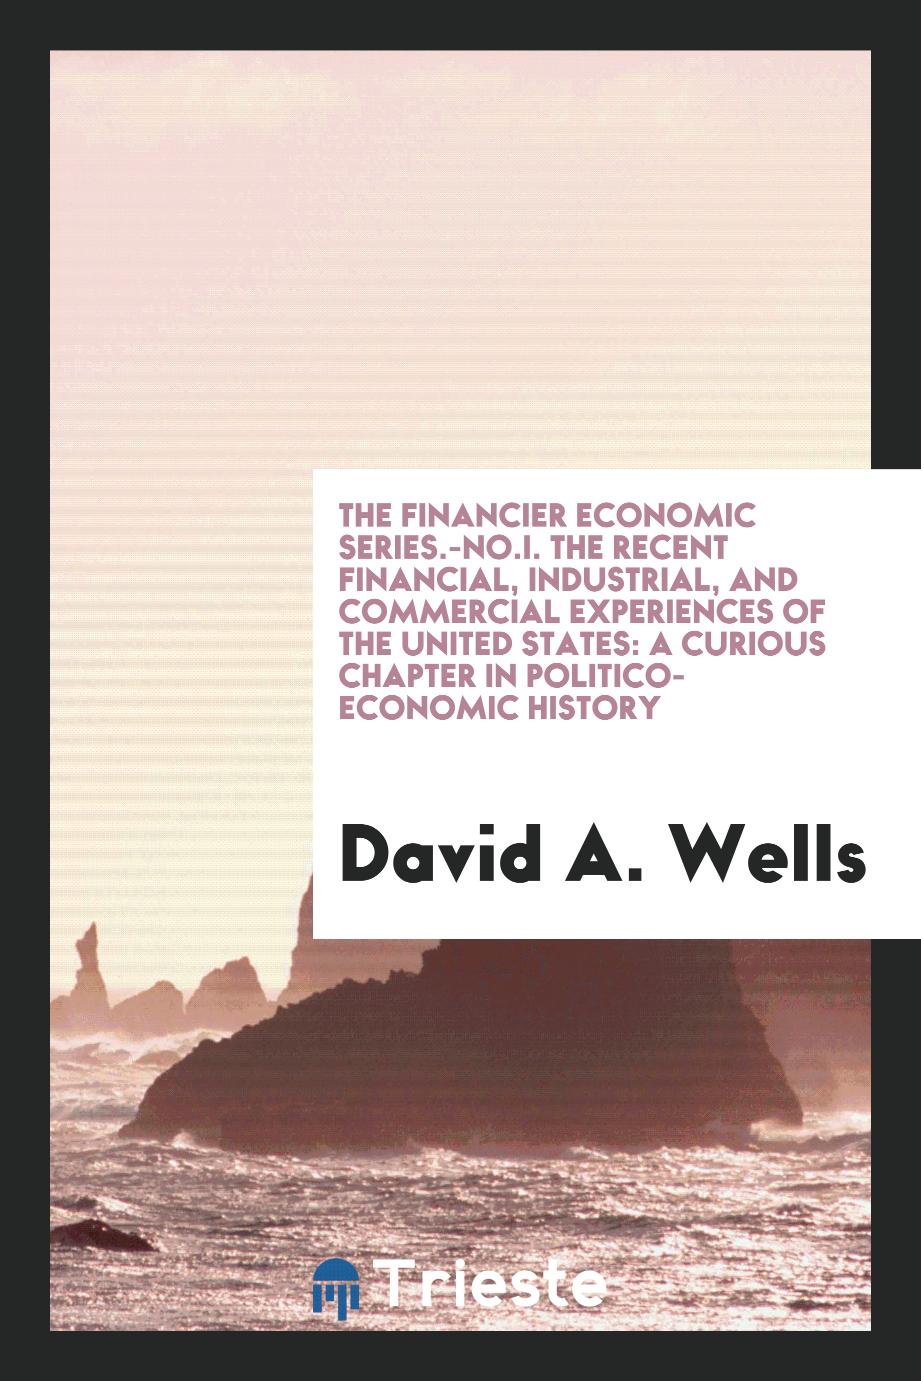 The Financier Economic Series.-No.I. The Recent Financial, Industrial, and Commercial Experiences of the United States: A curious Chapter in Politico-Economic History